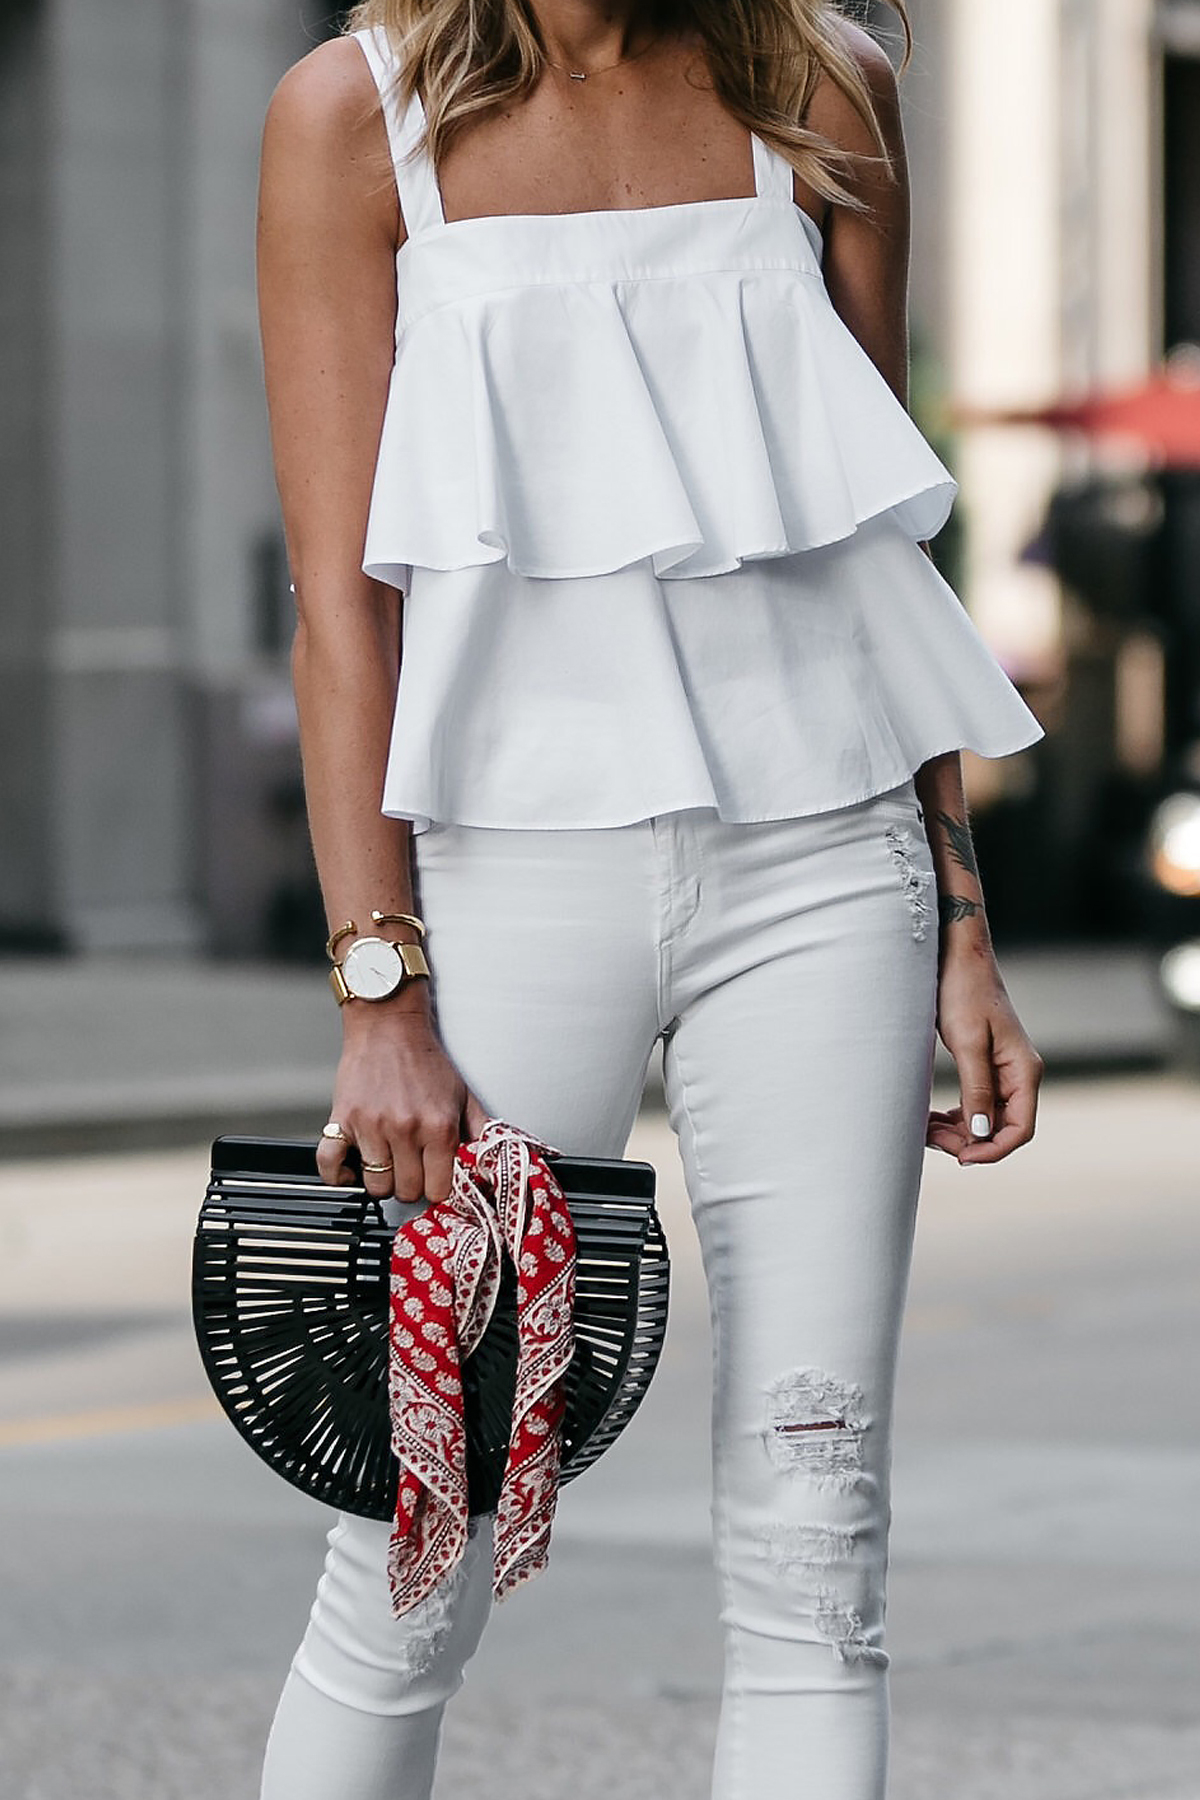 Nordstrom White Ruffle Tank White Ripped Skinny Jeans Outfit Cult Gaia Black Acrylic Clutch Red Bandana Fashion Jackson Dallas Blogger Fashion Blogger Street Style